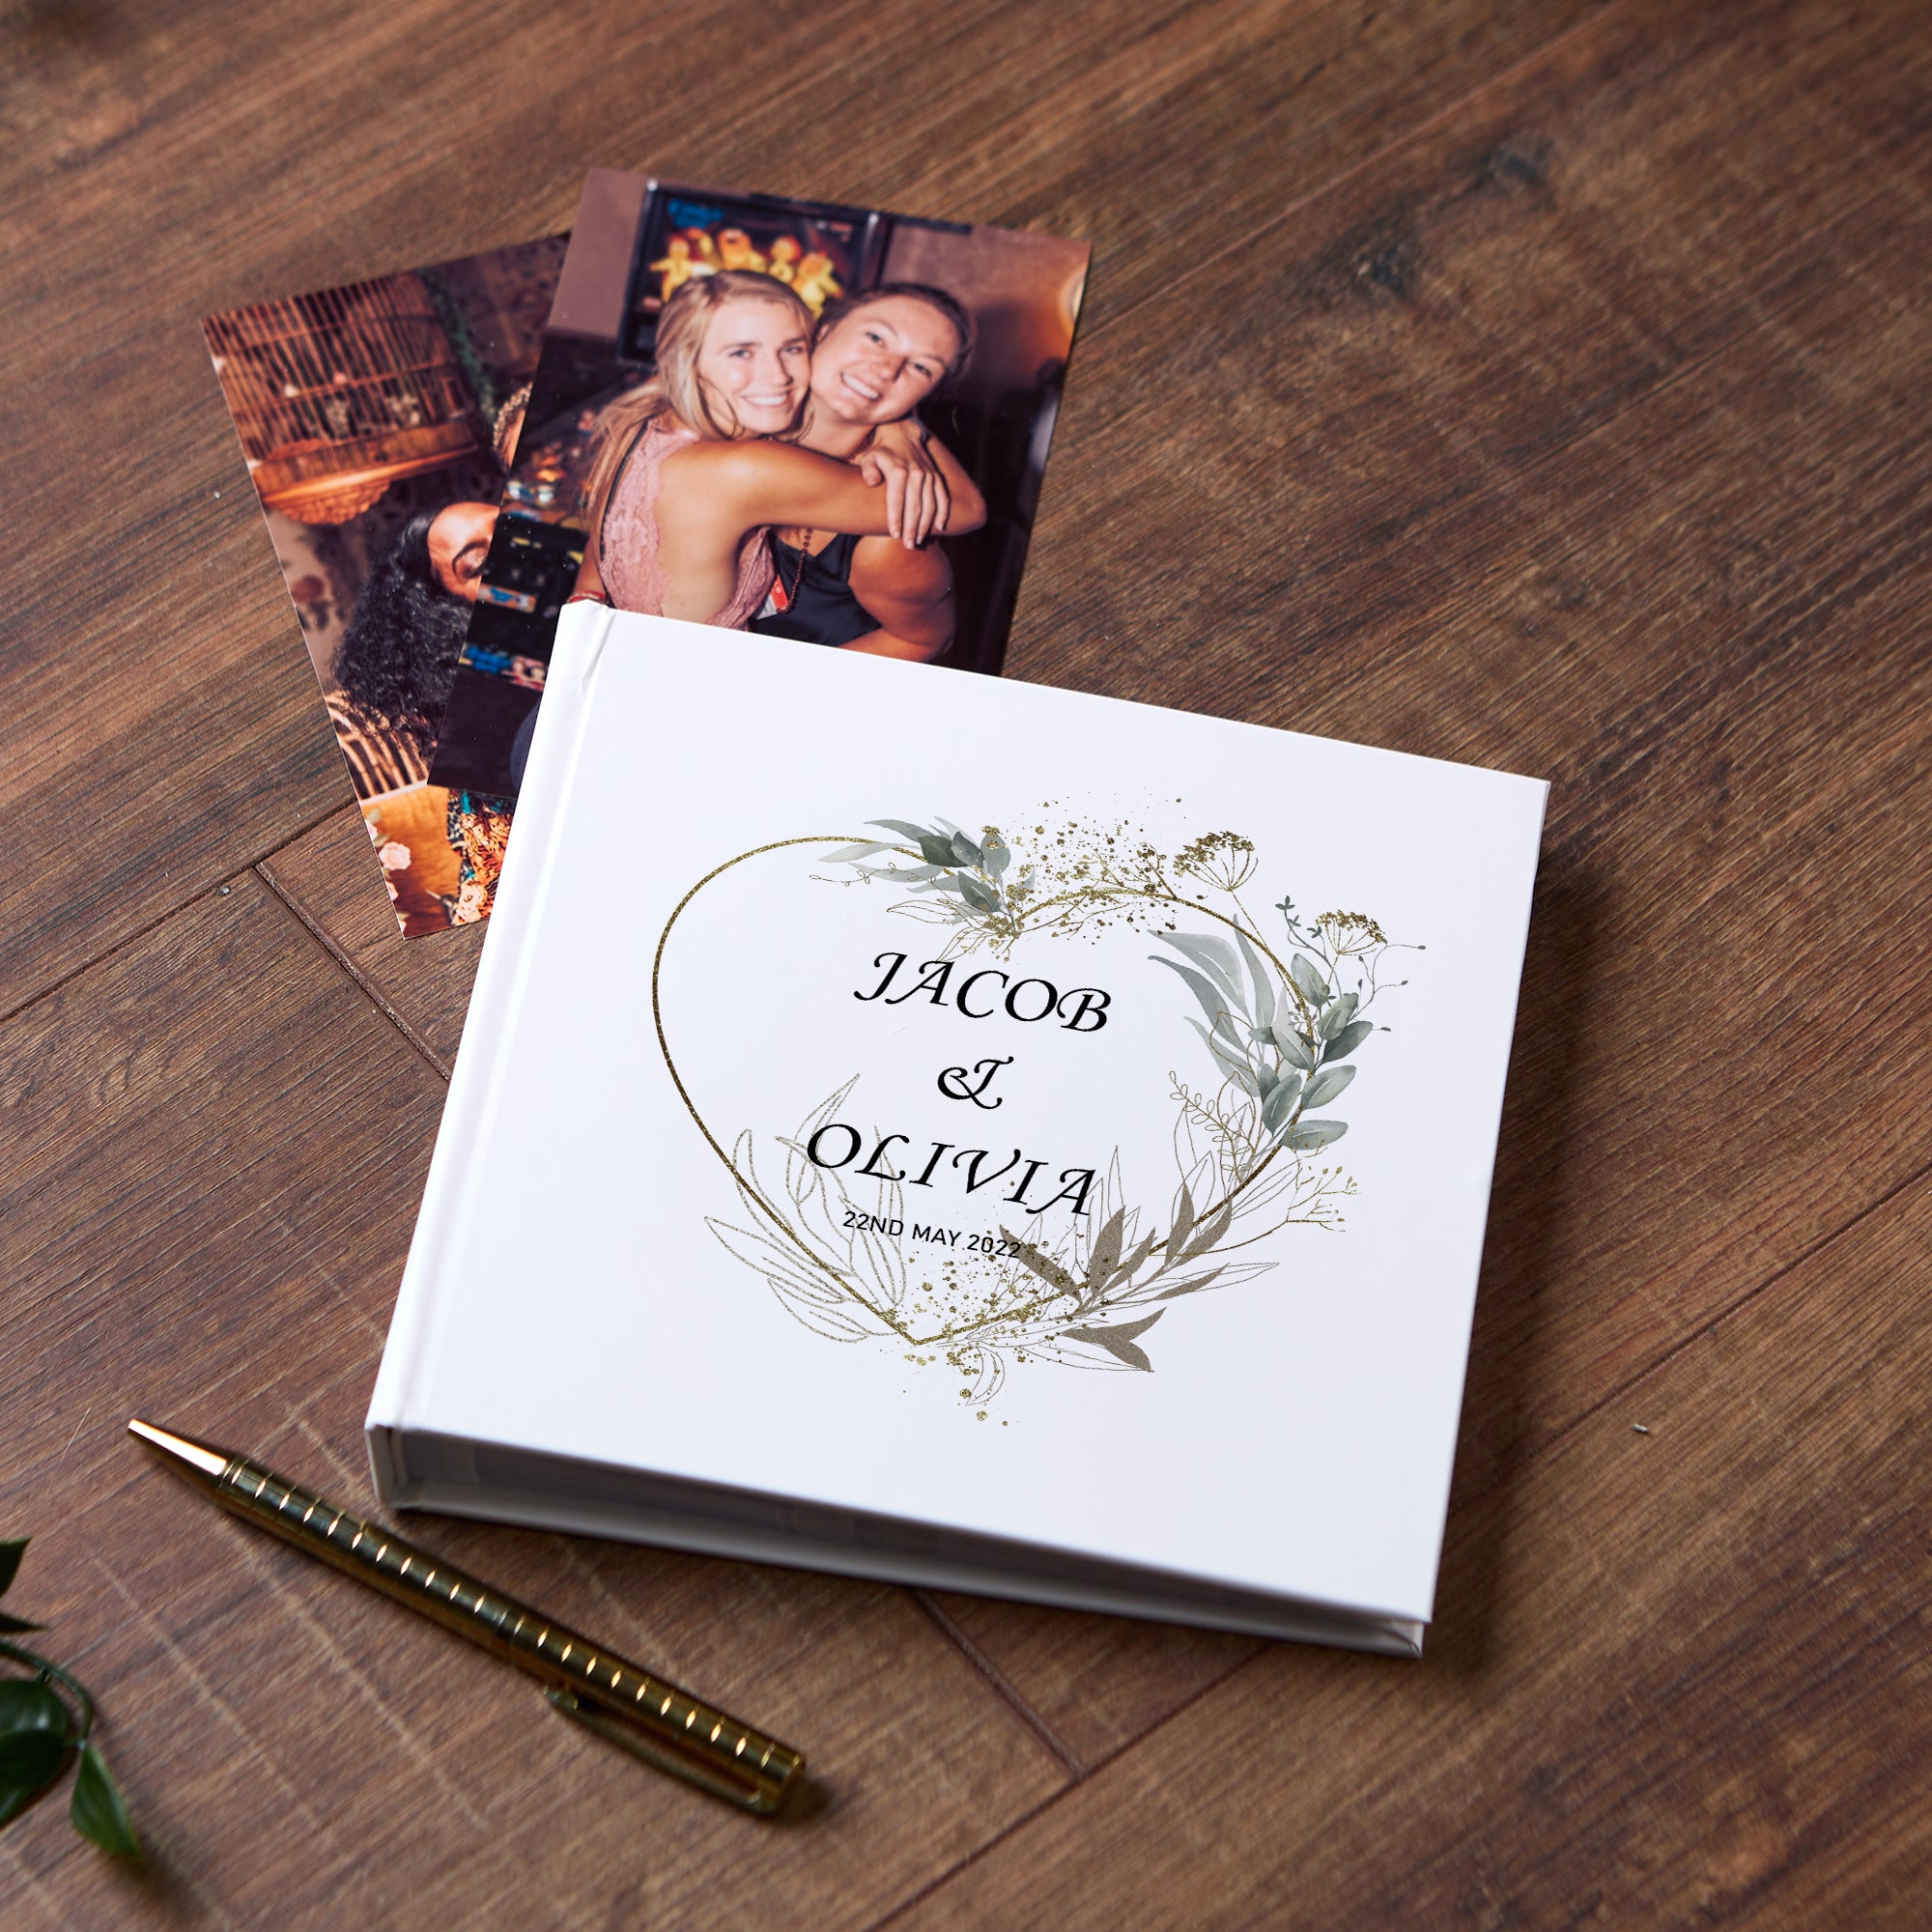 Personalised Wedding Photo Album Gift Gold and Grey Heart